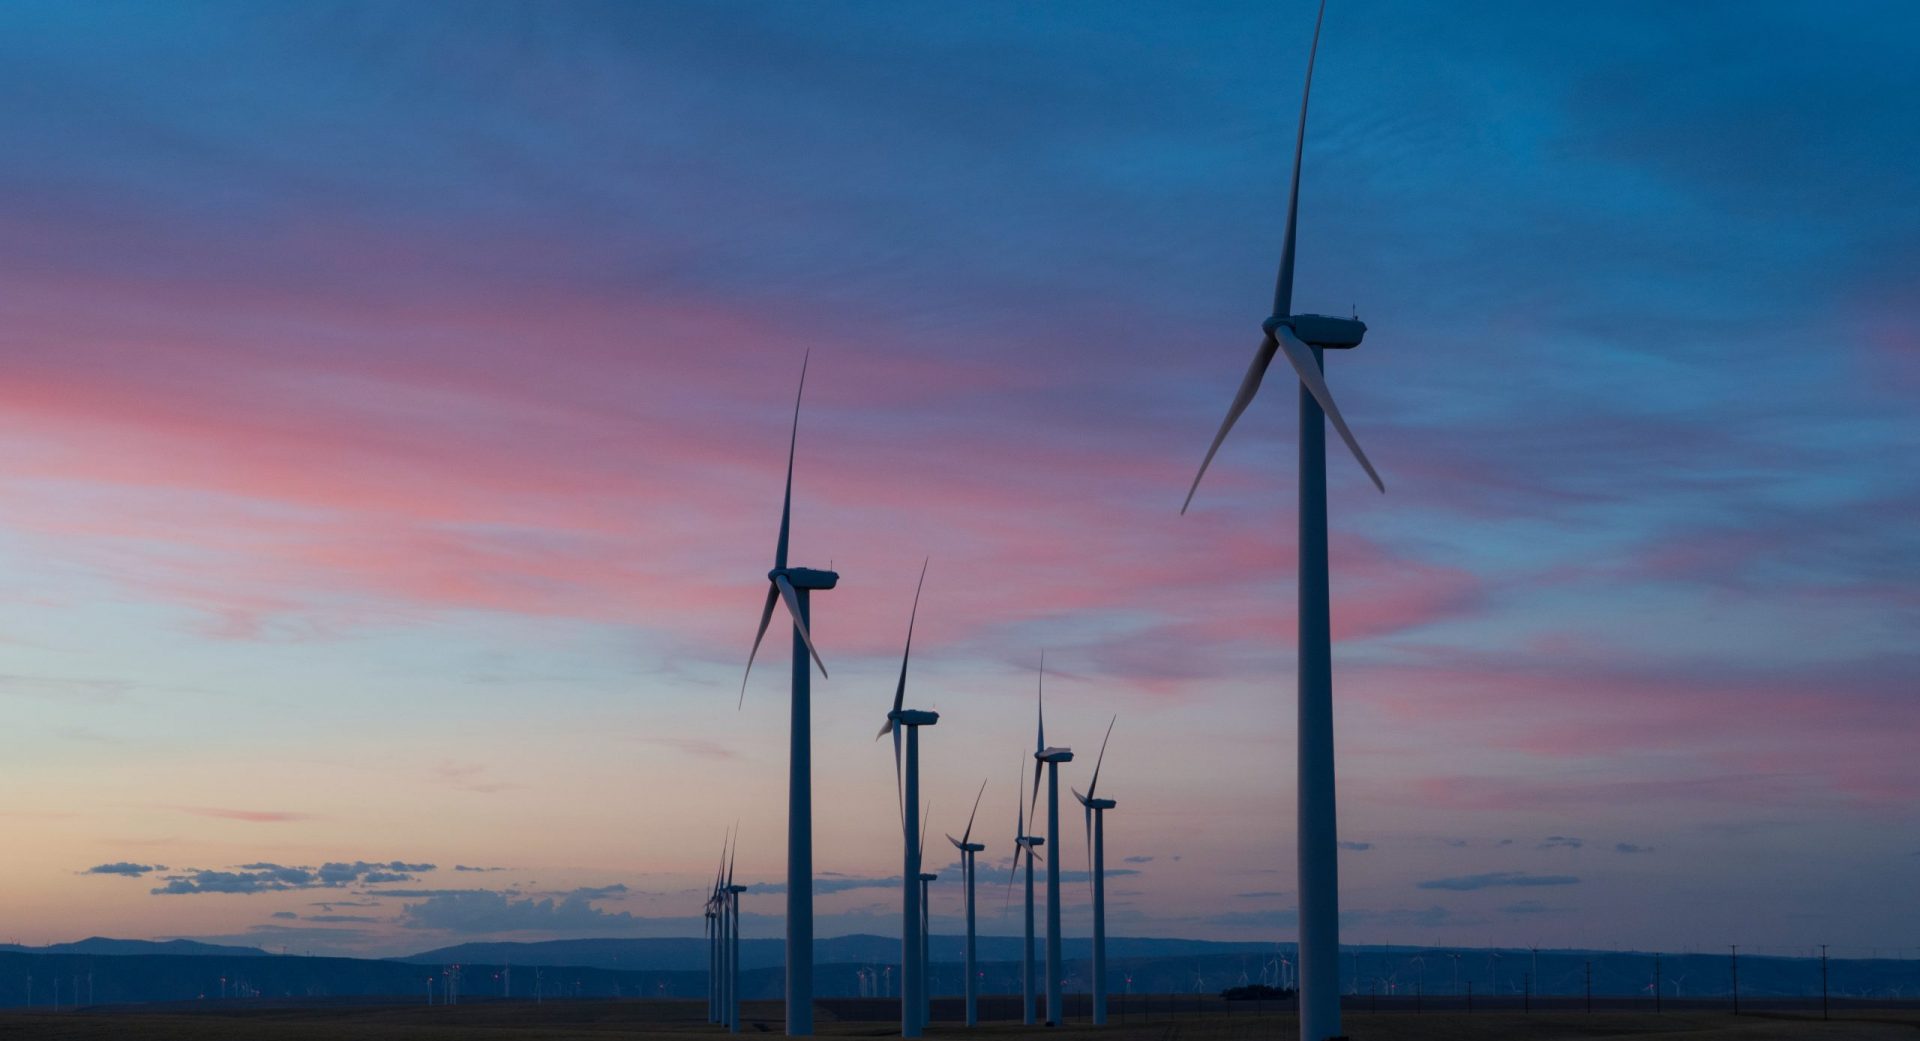 A sunset view over a line of windfarm turbines demonstrates renewable power generation for your decarbonisation strategy